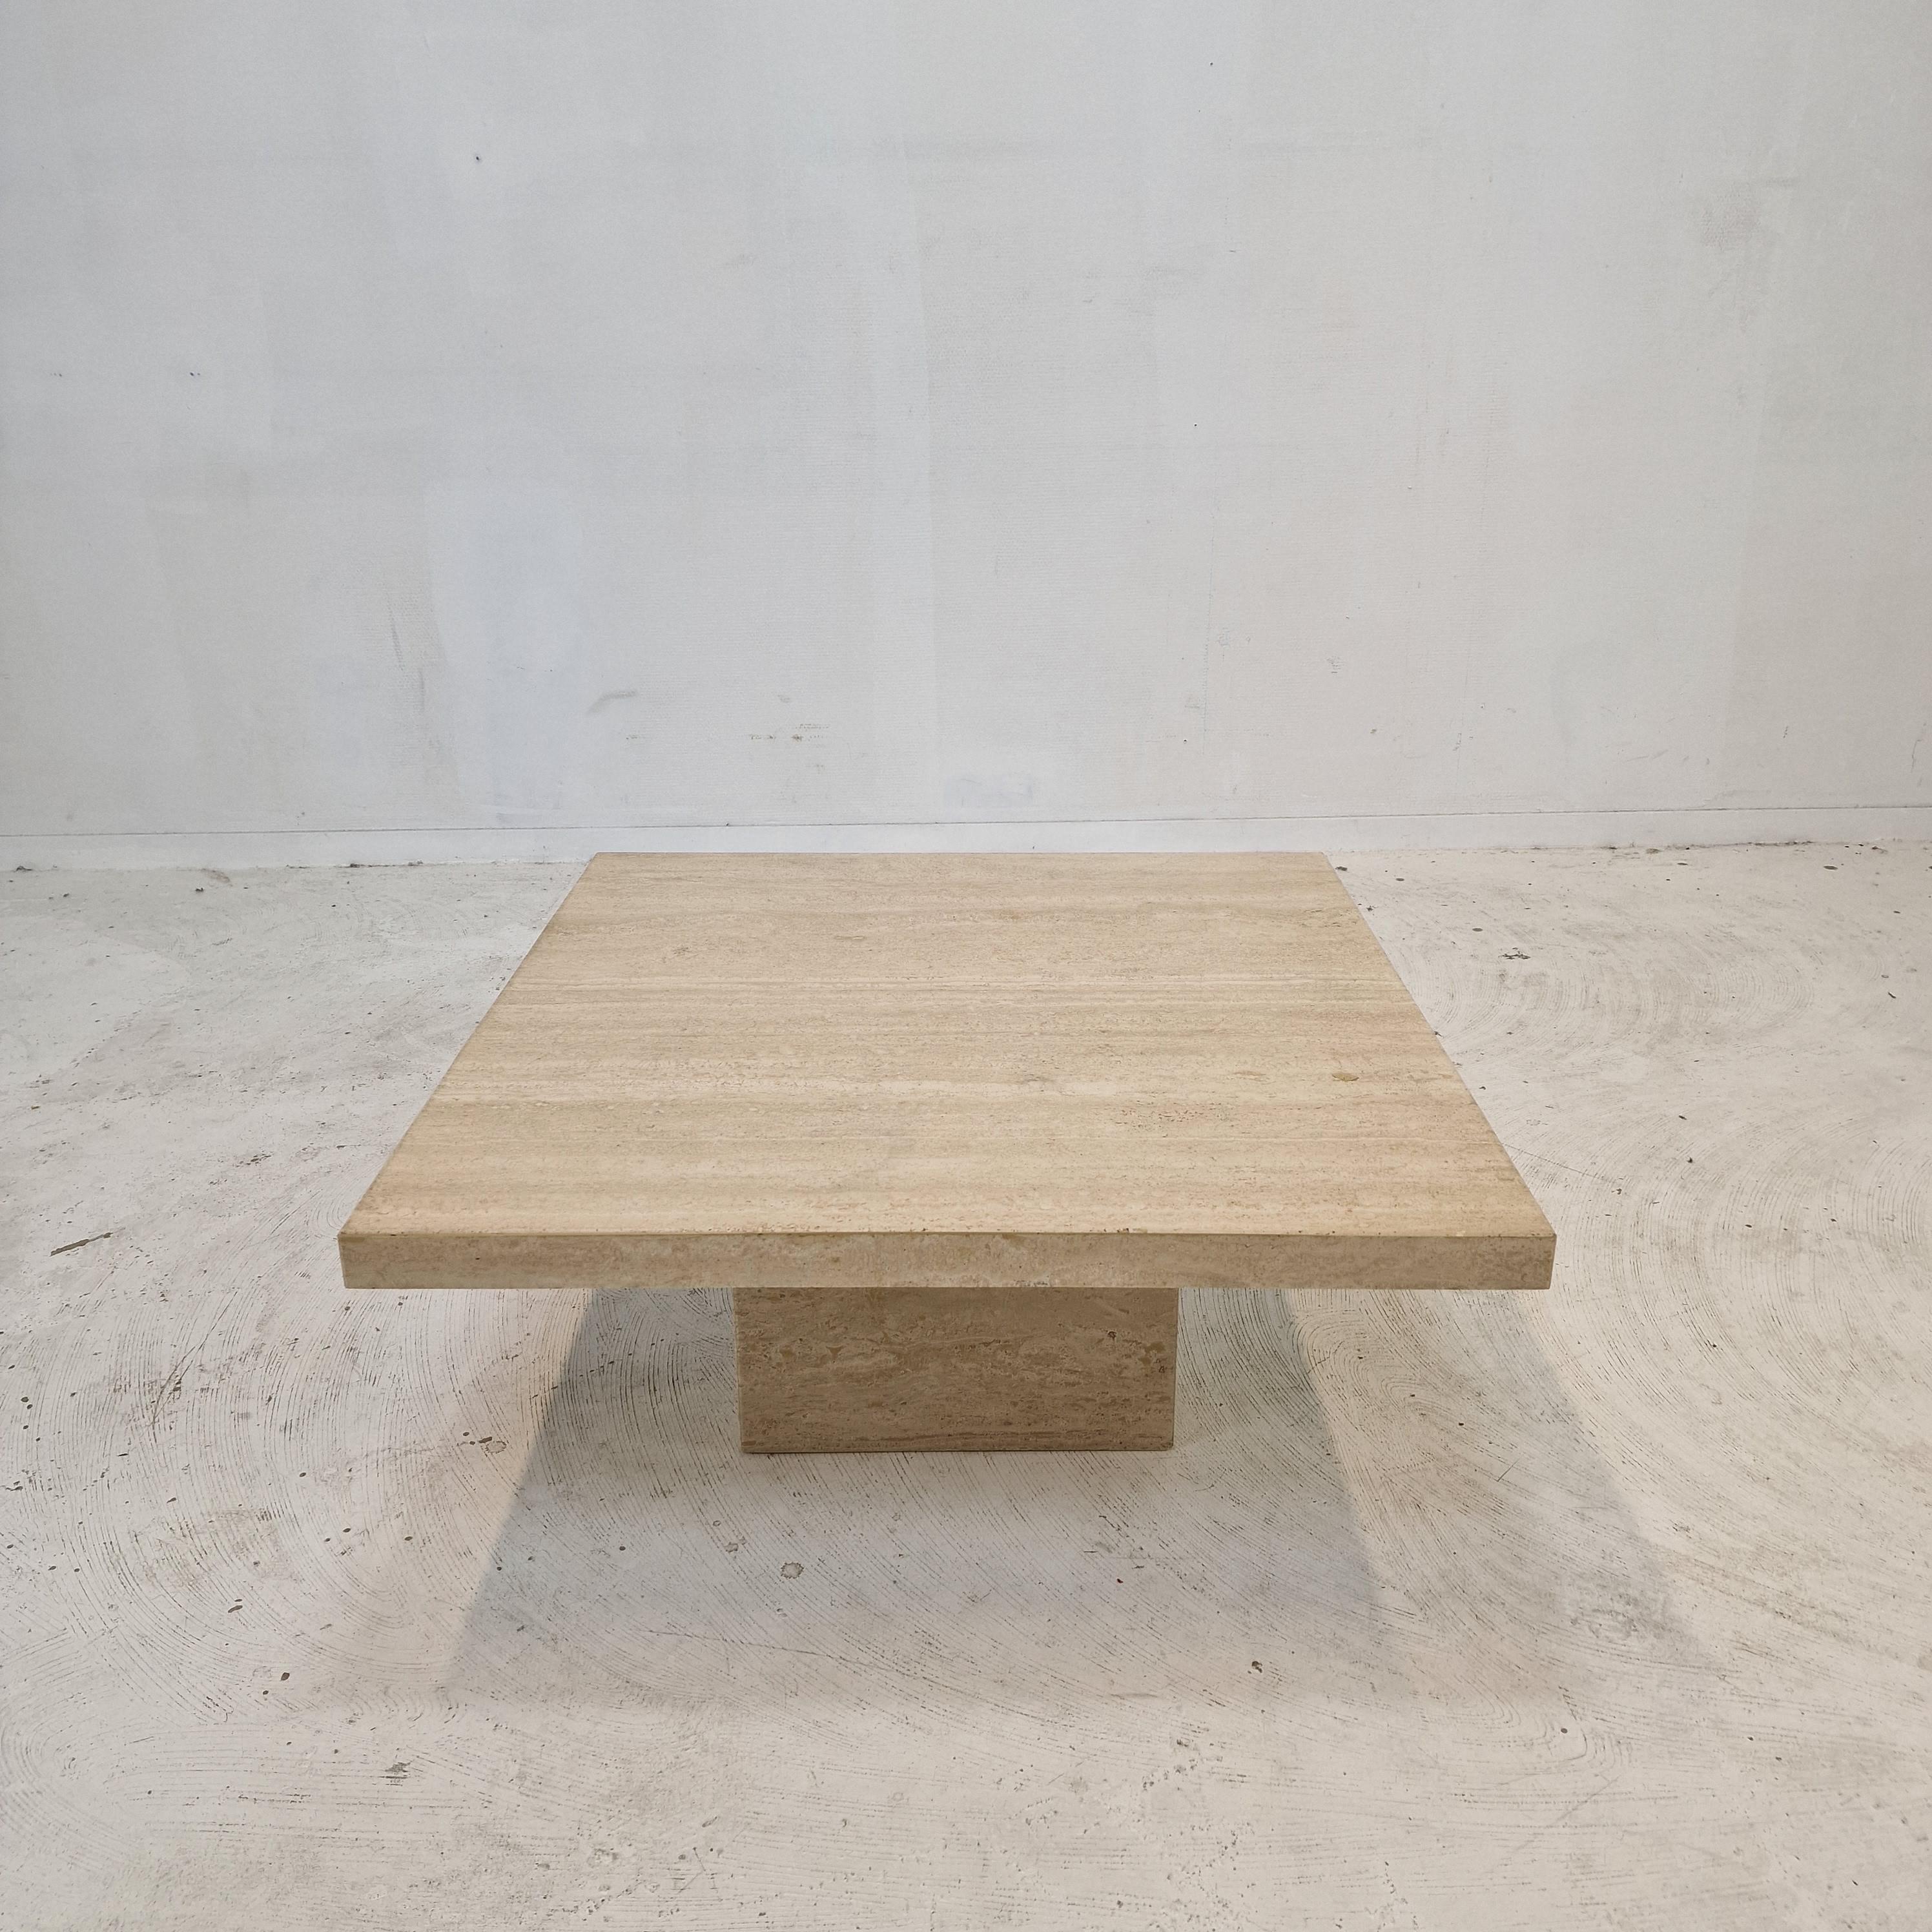 Hand-Crafted Italian Square Coffee Table in Travertine, 1980s For Sale